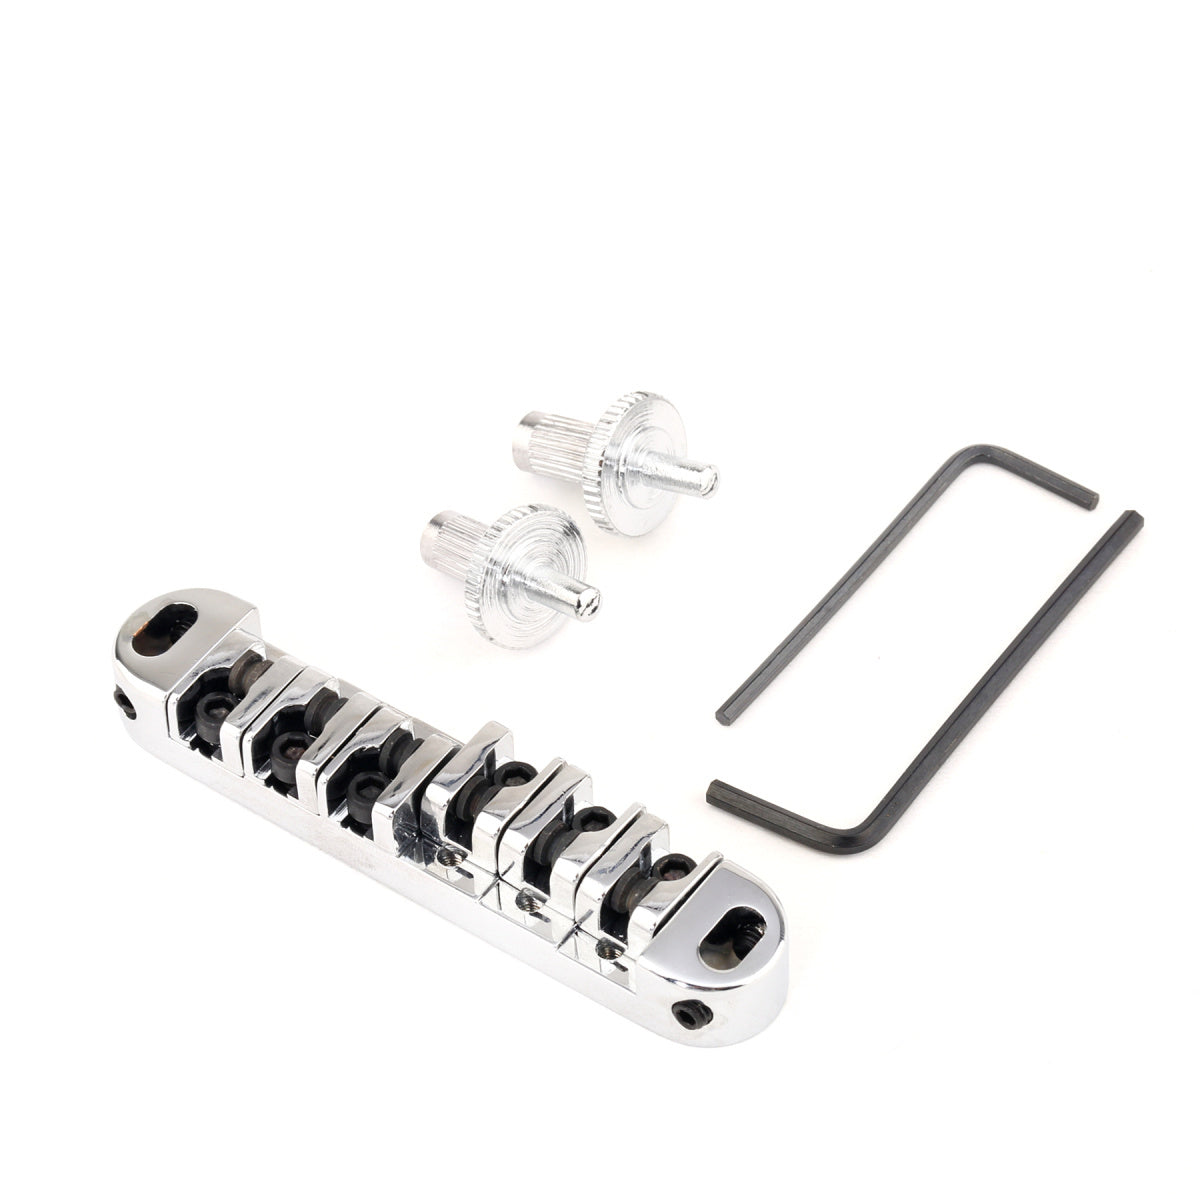 Musiclily Roller Locking Tune-o-matic Guitar Bridge Tunematic Saddle for Les Paul Style Electric Guitar,Chrome